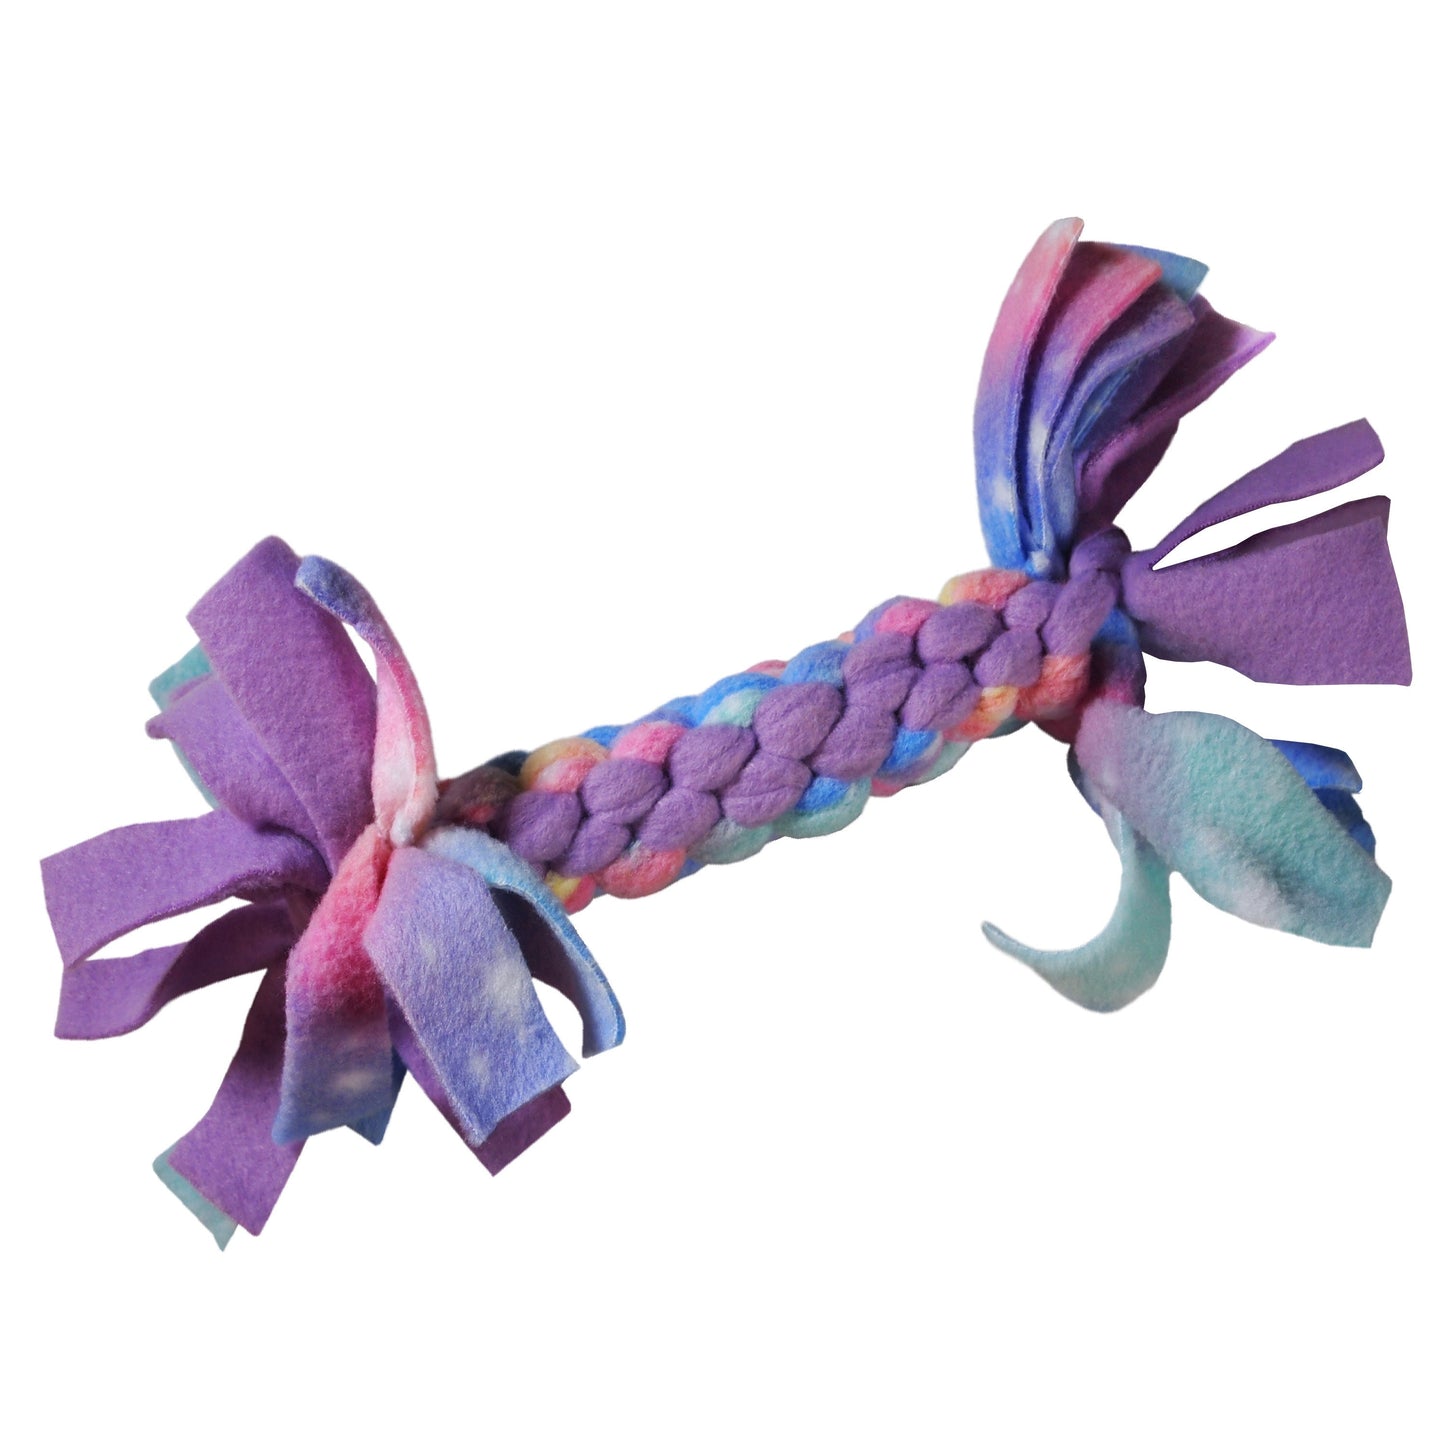 Paisley's Playthings :  Braided Fleece Dog Toy 2 - LEAGUE OF CRAFTY CANINES